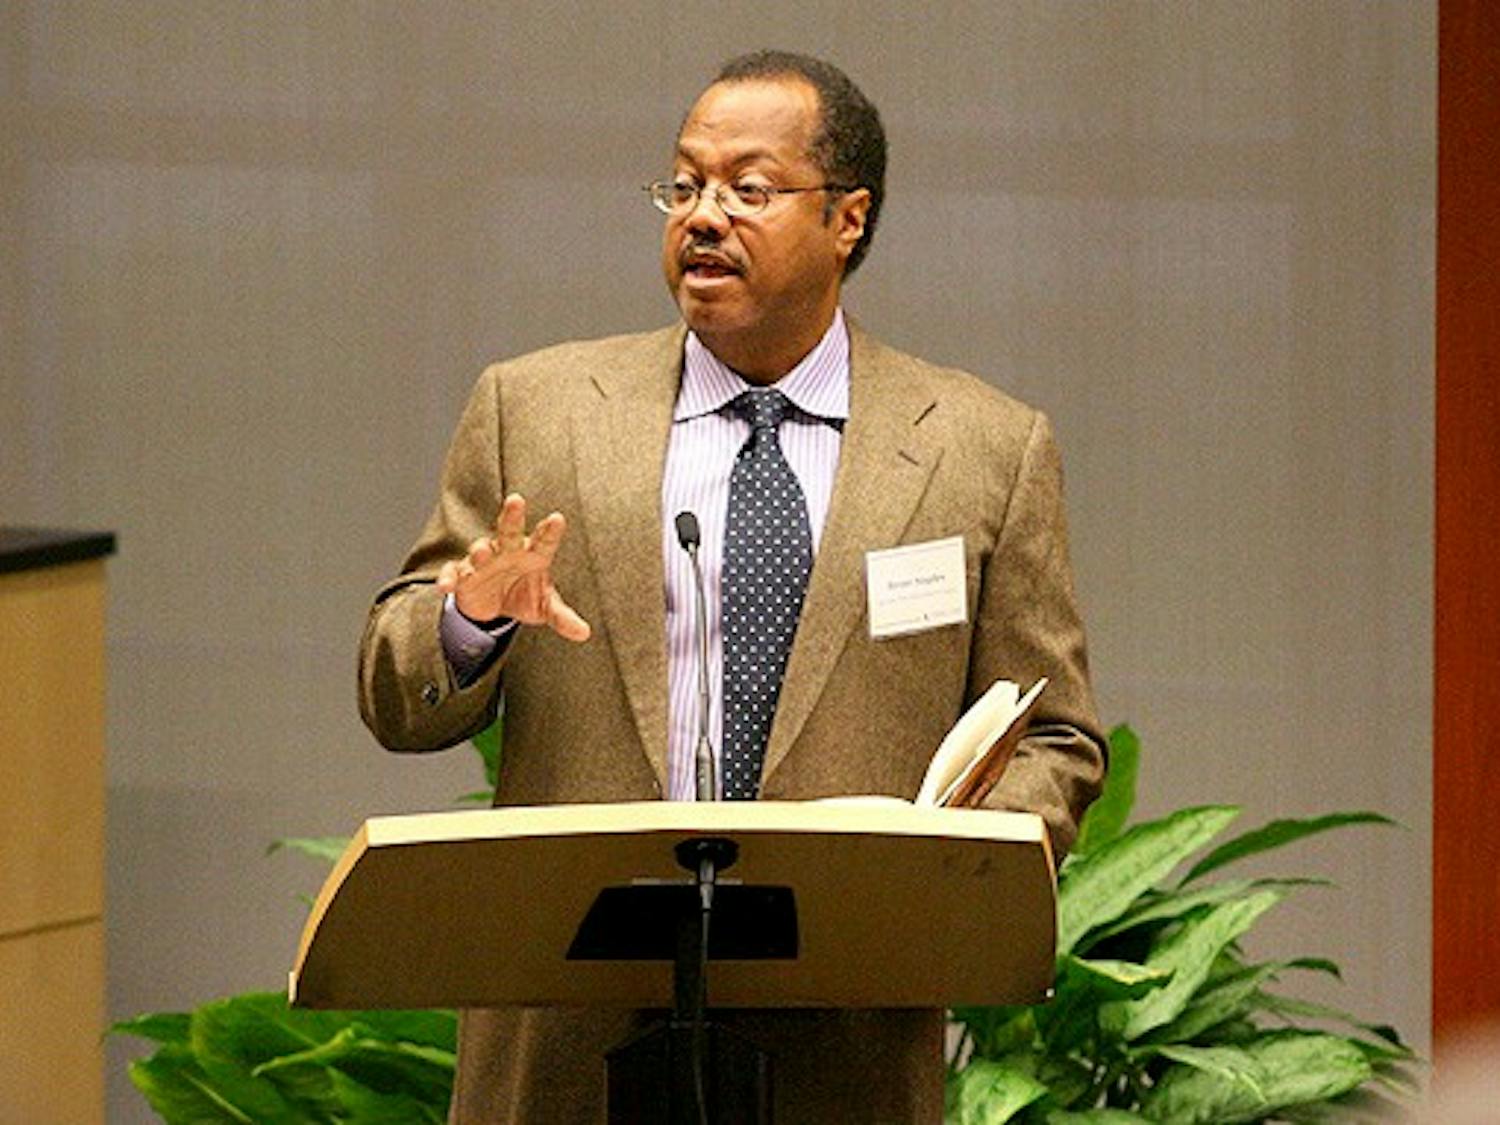 New York Times Editorial Board member Brent Staples speaks about the legacy of John Hope Franklin during the three-day conference honoring the late James B. Duke professor emeritus of history Thursday.